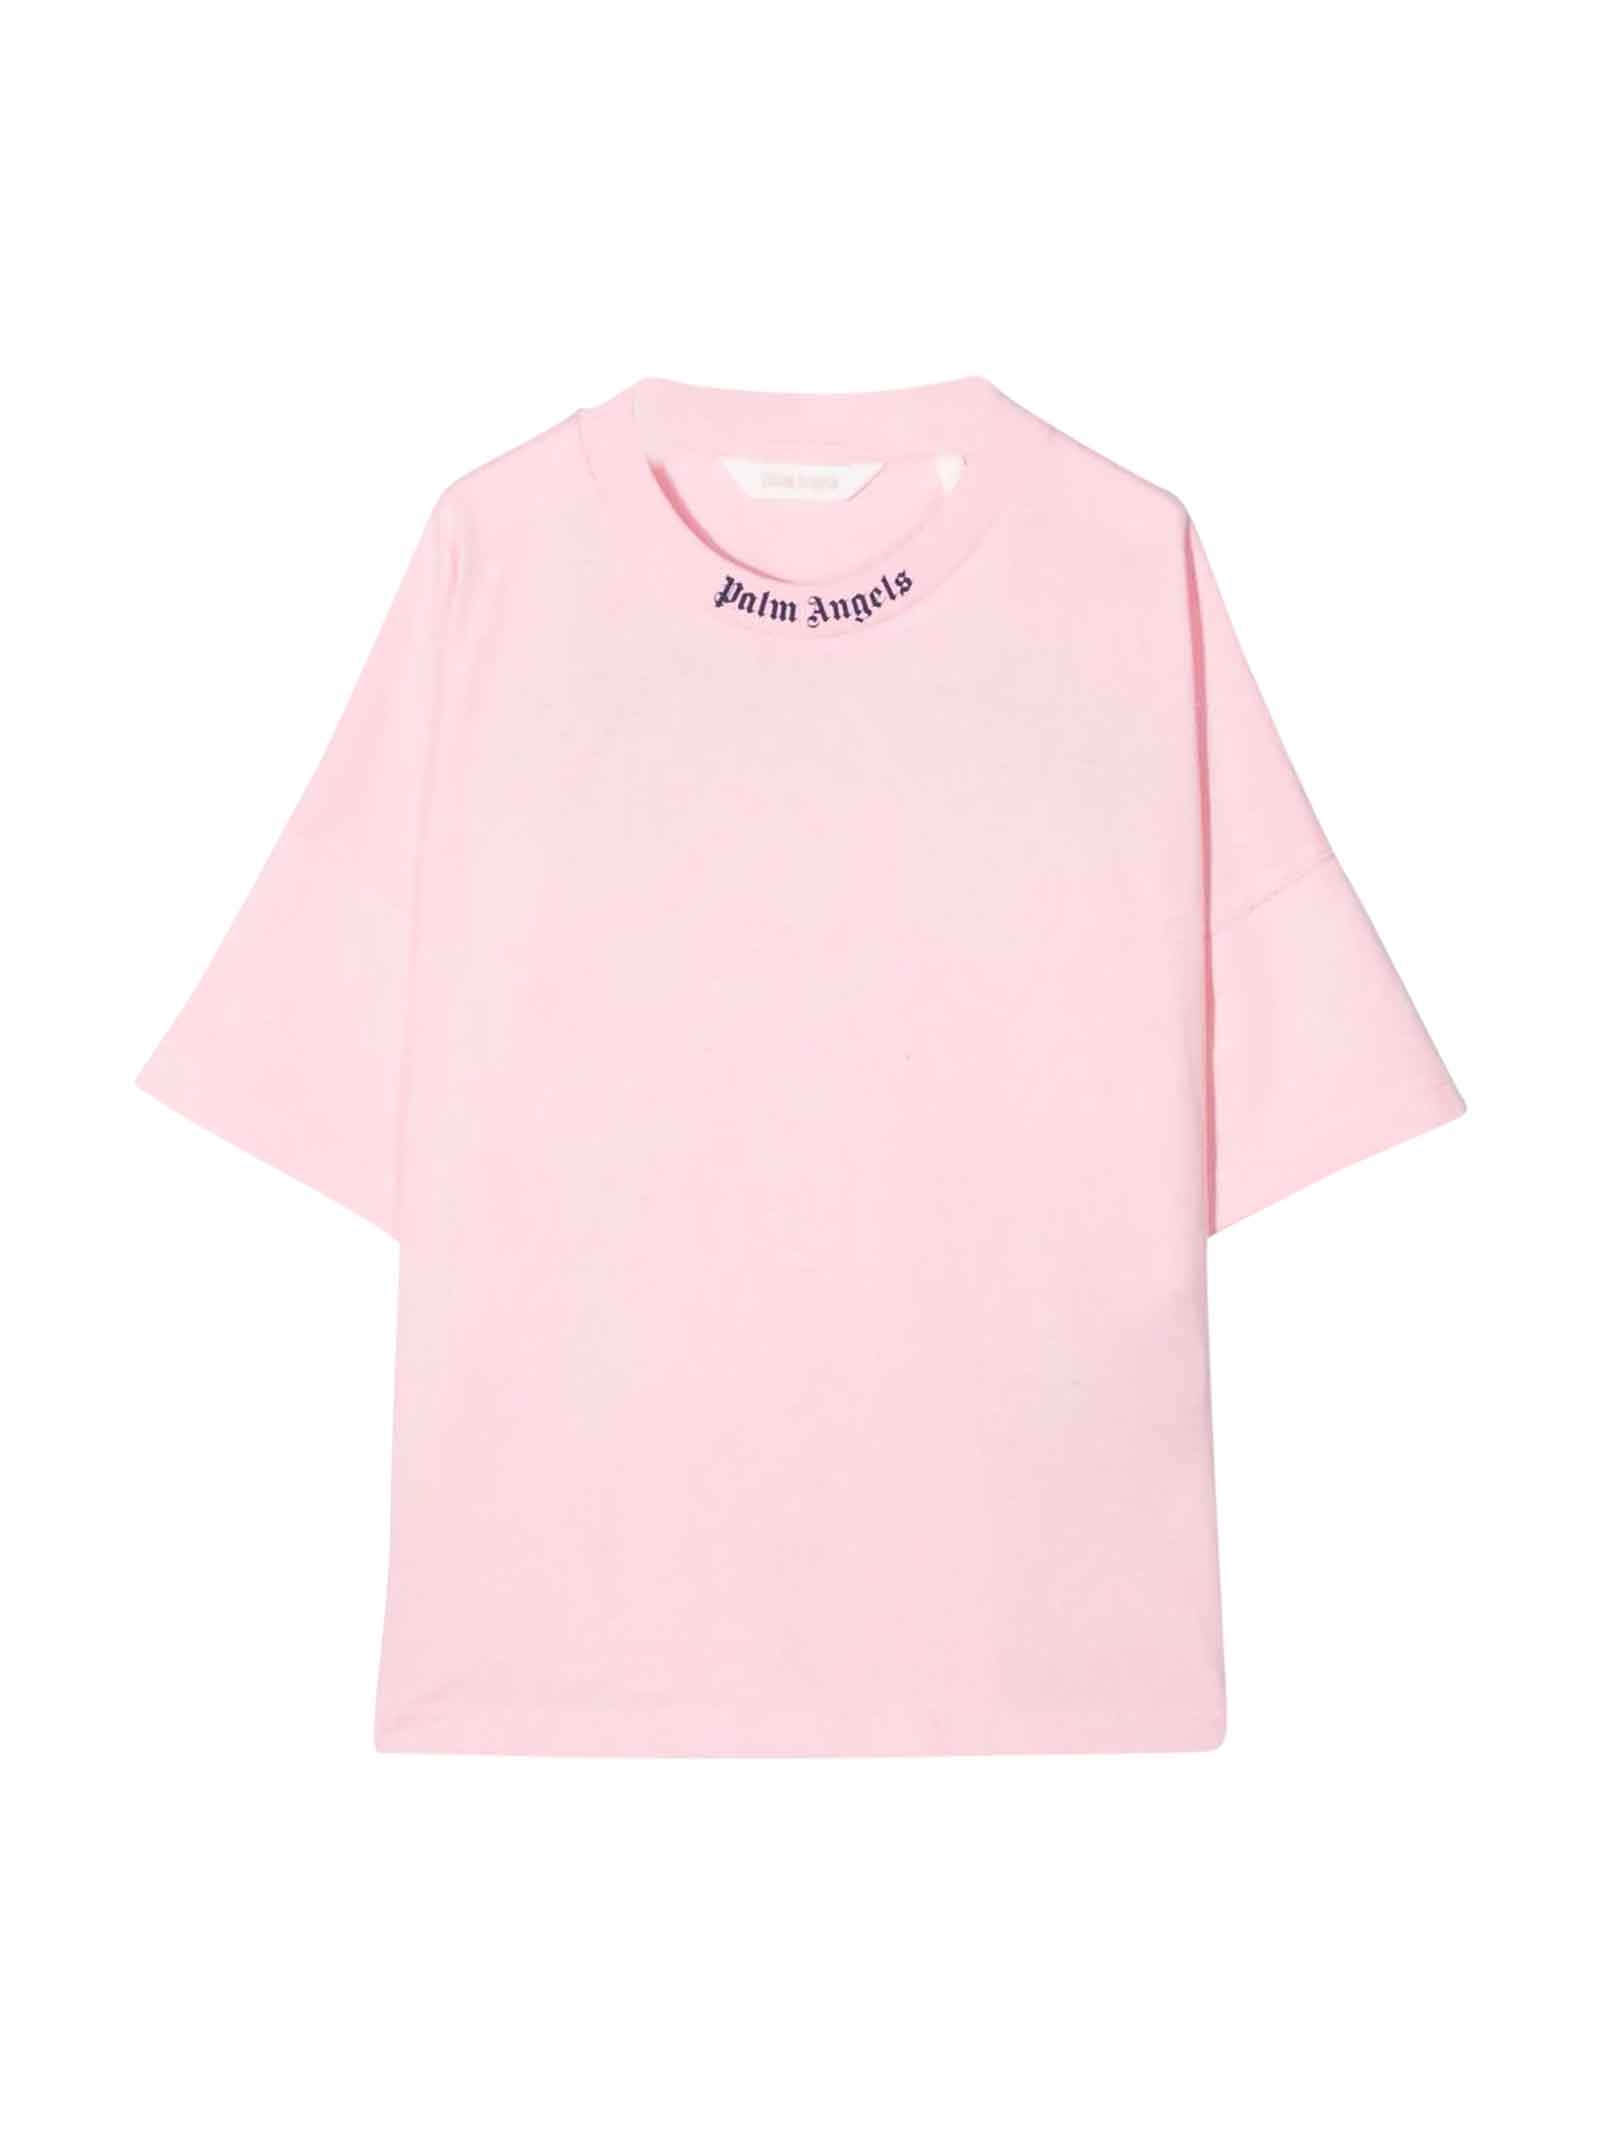 Palm Angels Pink T-shirt With Blue Print